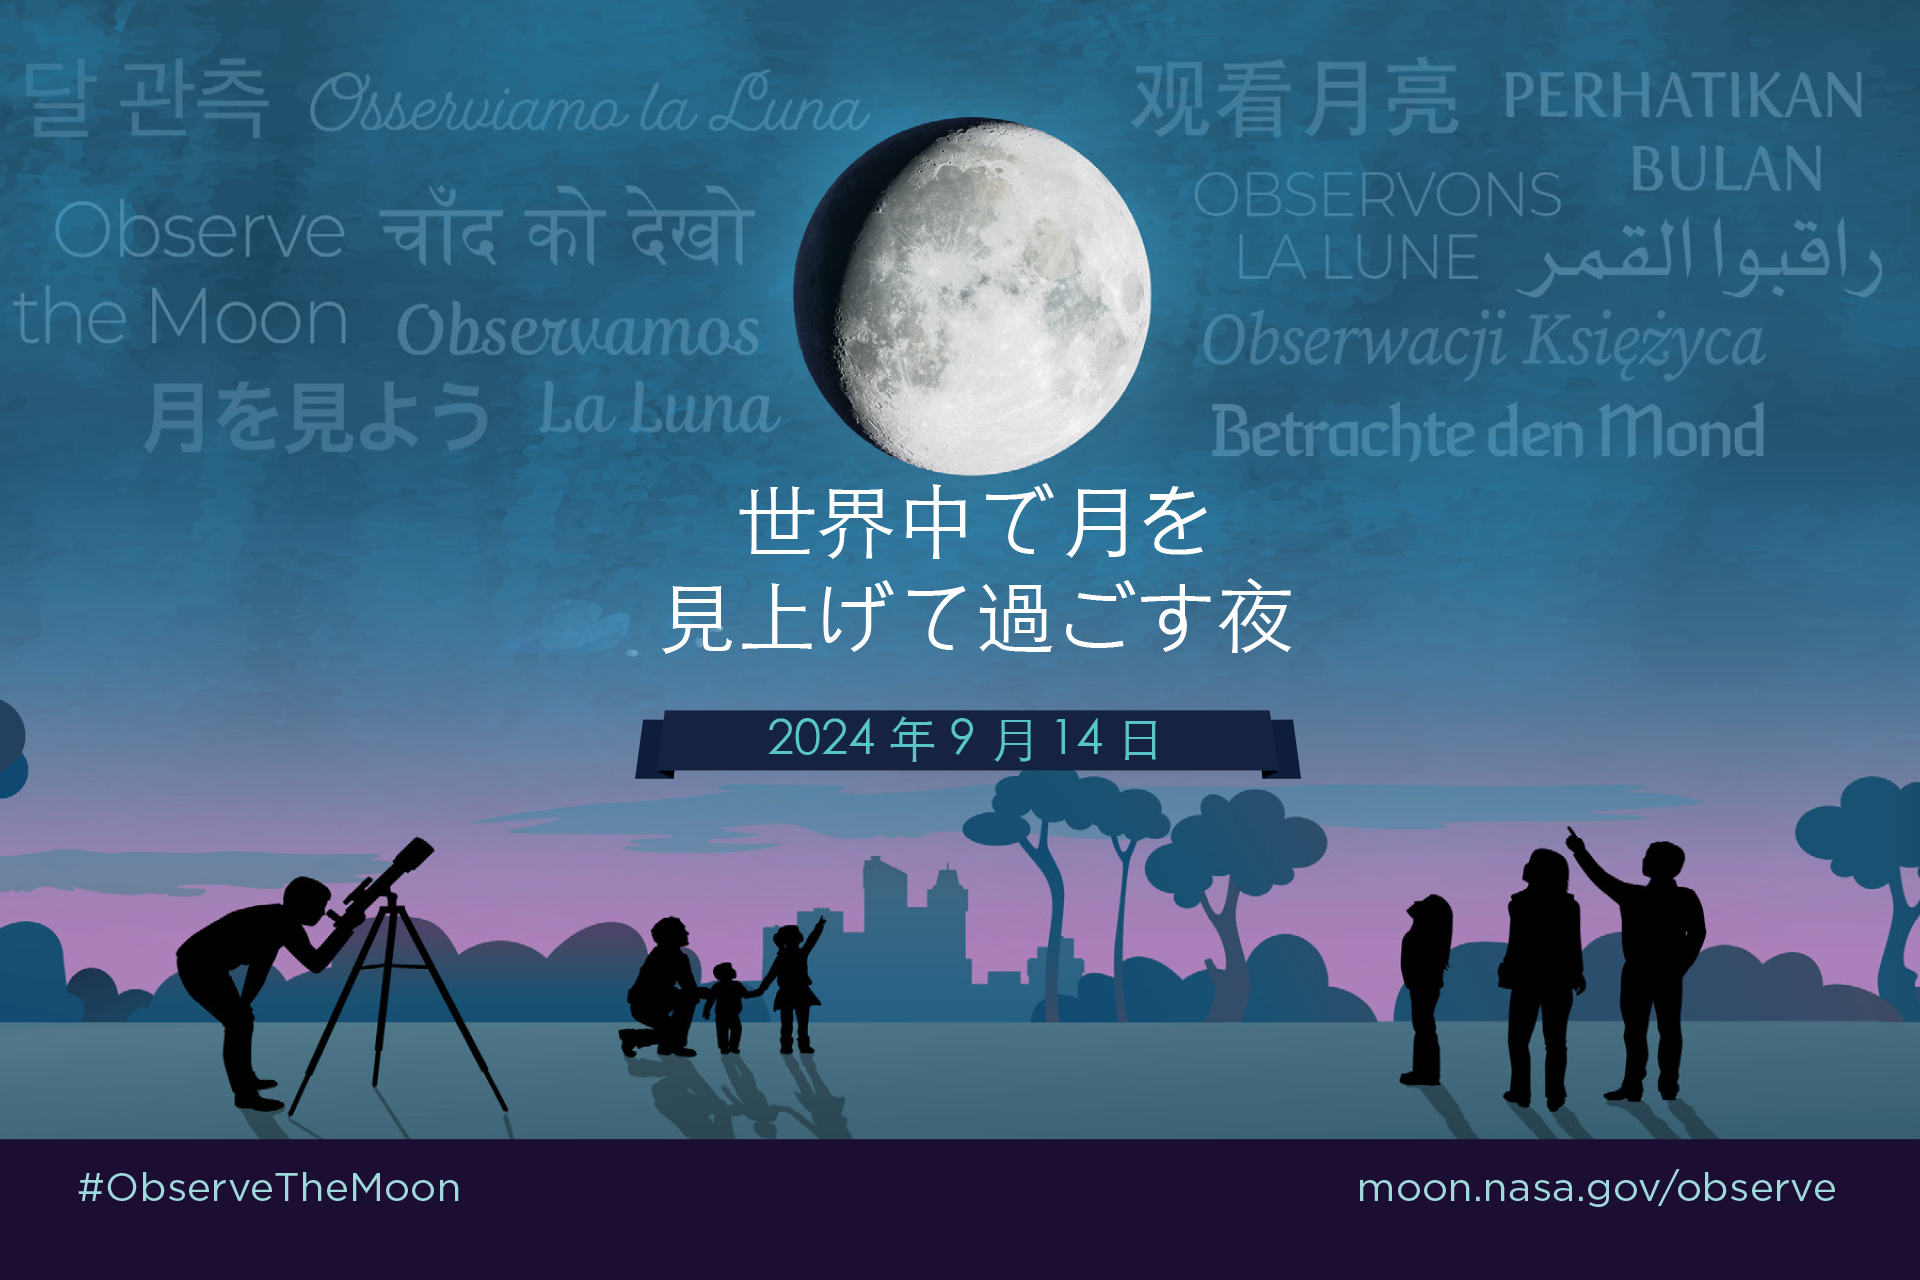 Stylized illustration of silhouettes of people looking up at a large Moon in the night sky.